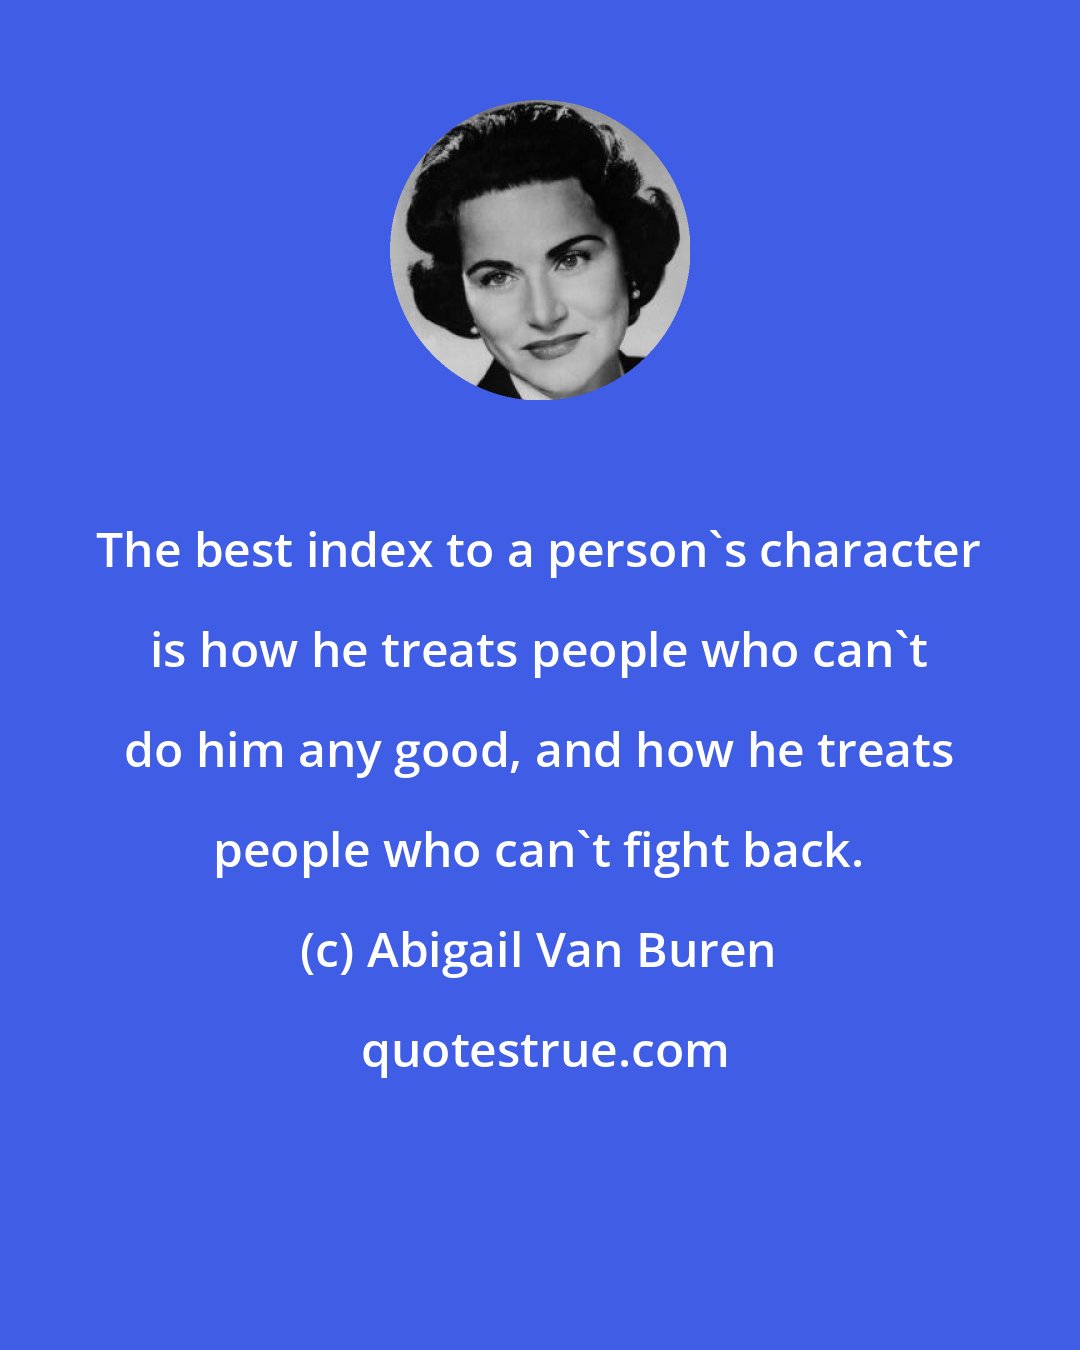 Abigail Van Buren: The best index to a person's character is how he treats people who can't do him any good, and how he treats people who can't fight back.